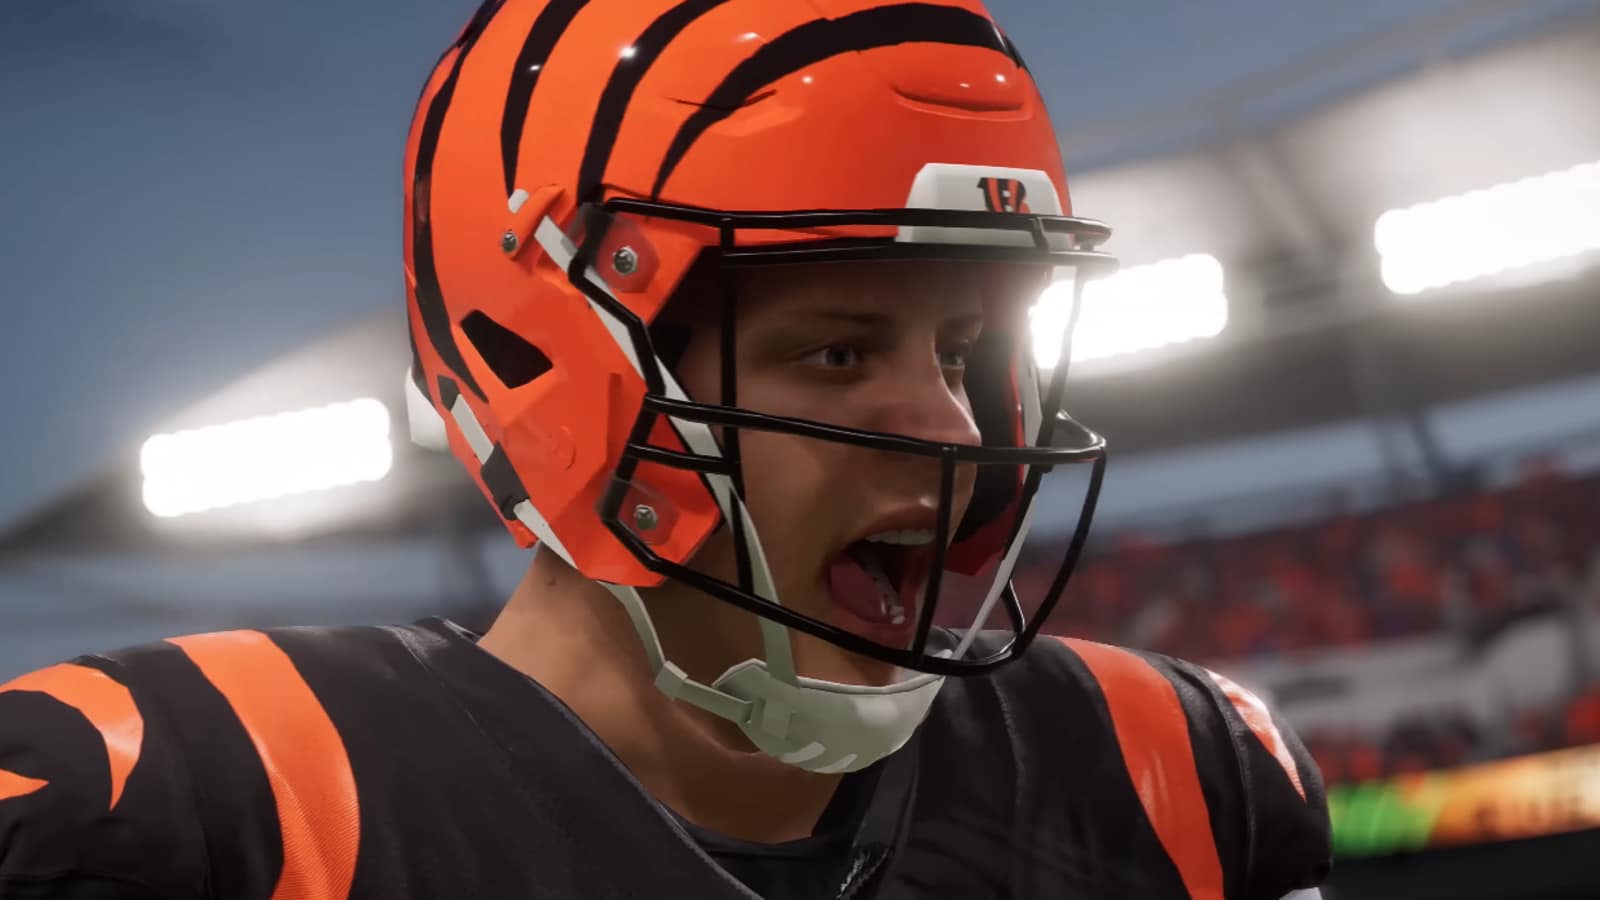 Madden 23 player rating complaint hotline gets over 1,000 calls in